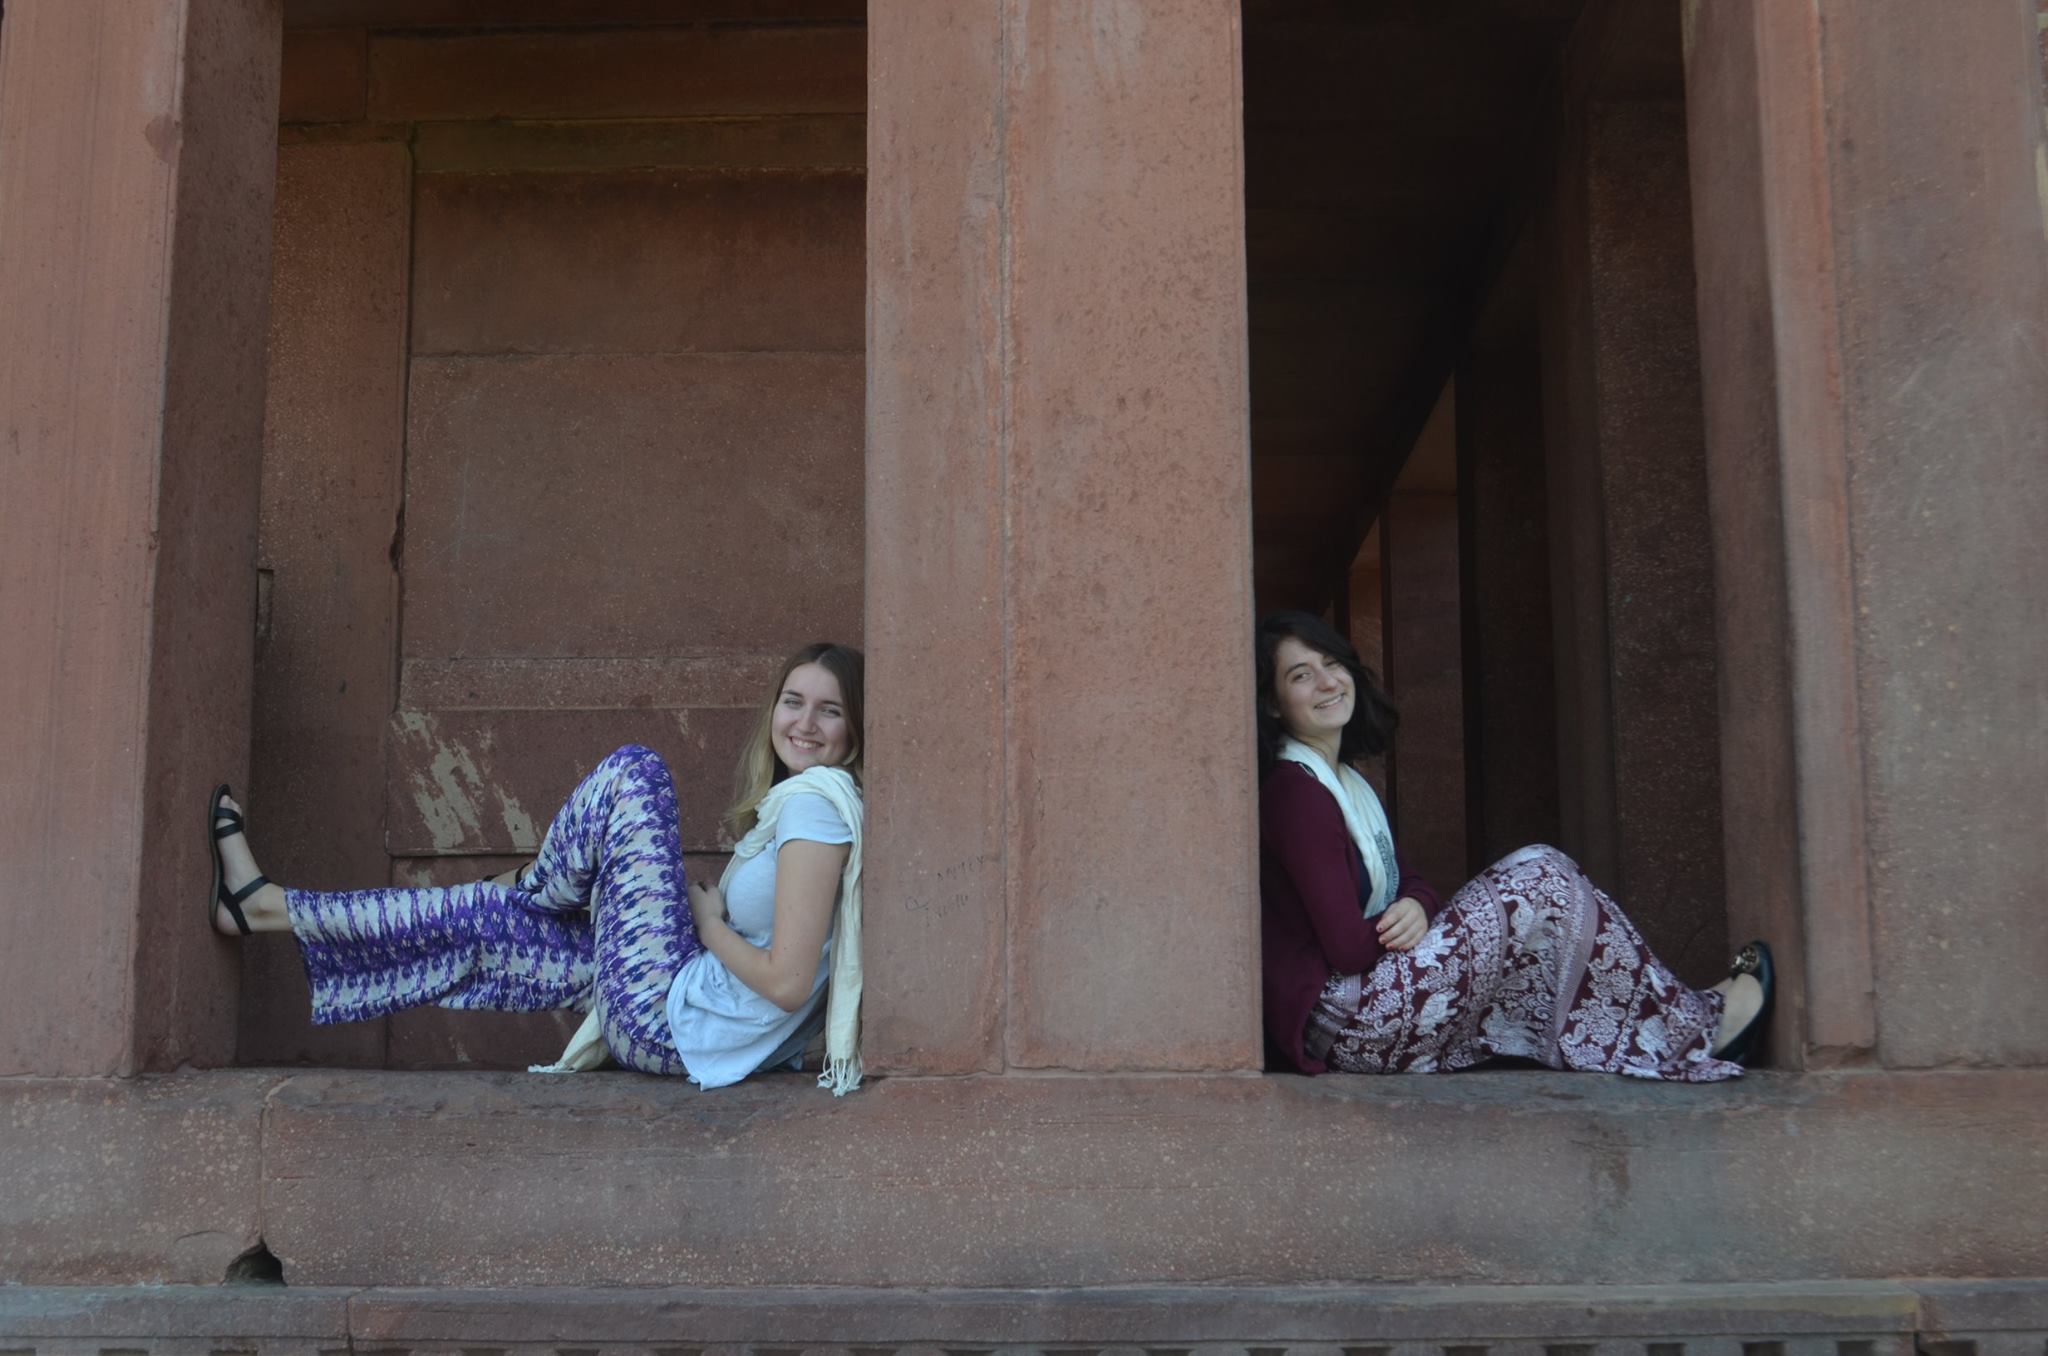 Jessica Thevenoz (’17) and Rebecca Jacobs (’17) at the City Palace in Jaipur, India